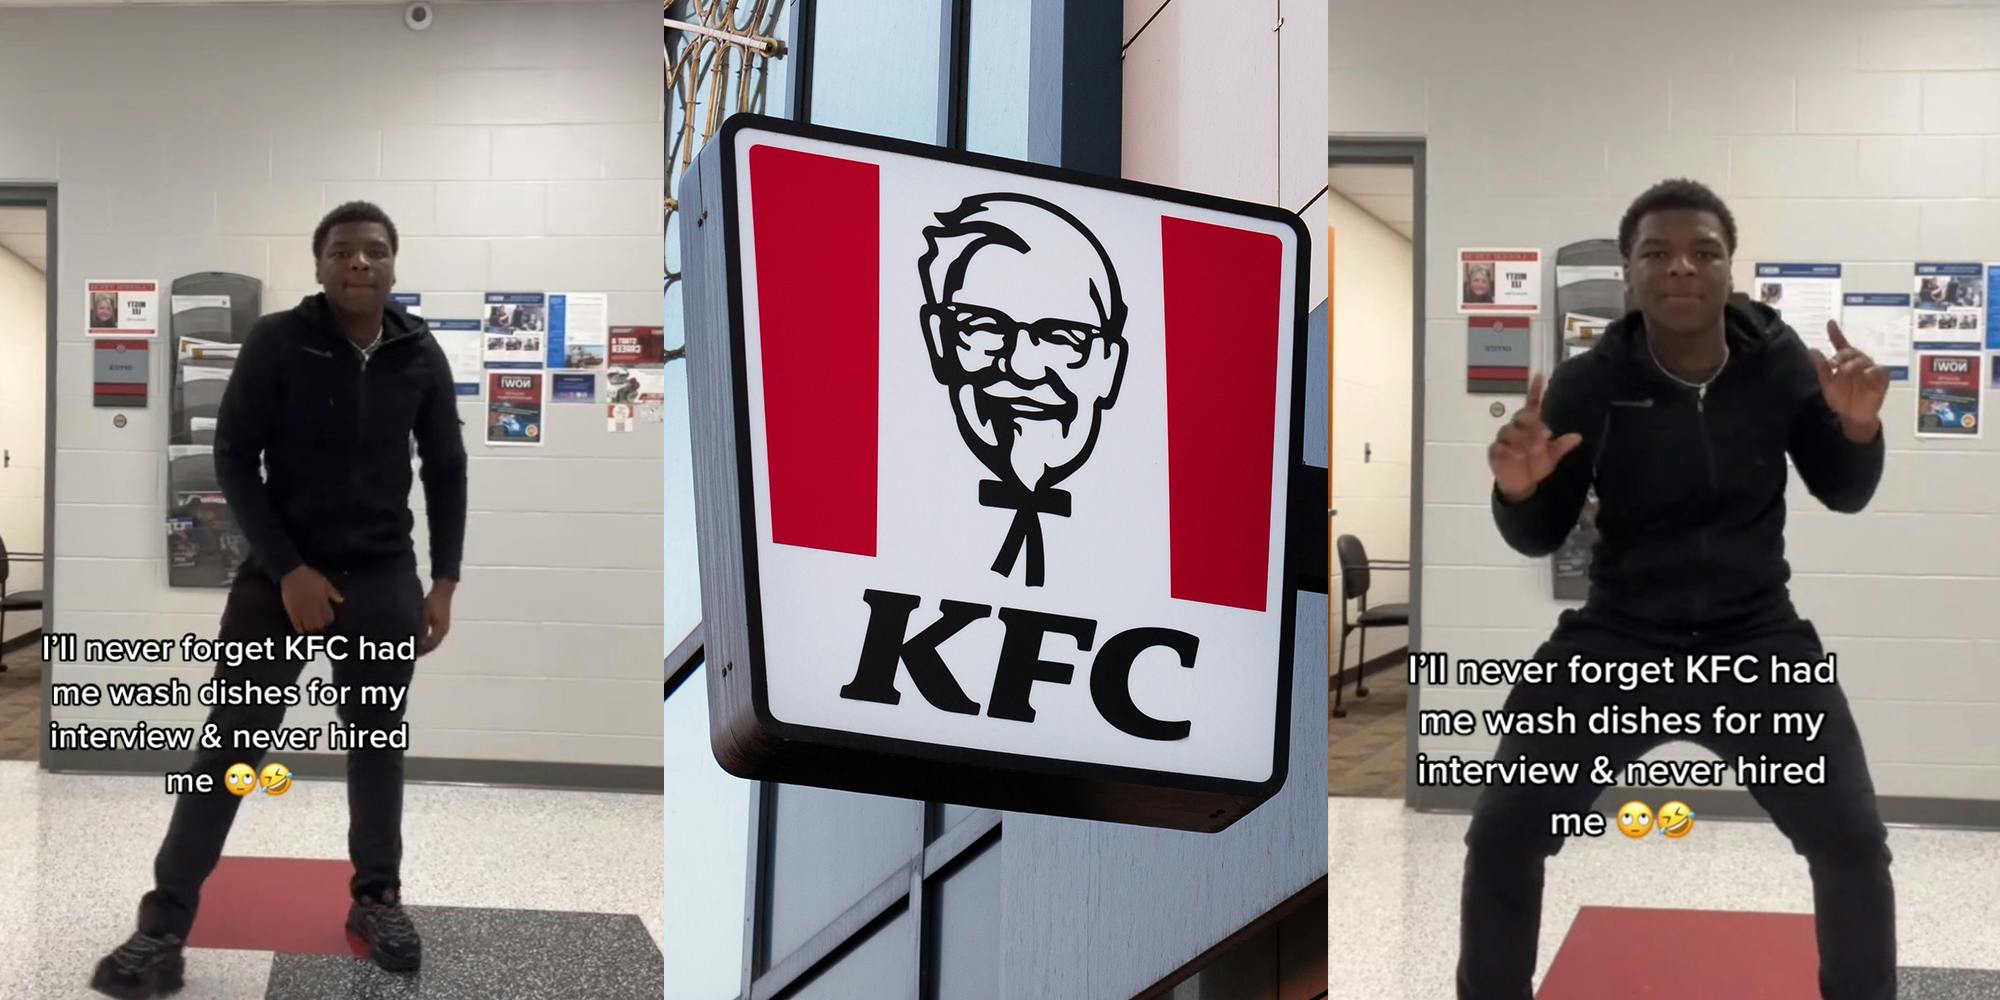 Applicant says KFC had him wash dishes on interview day and didn't hire him